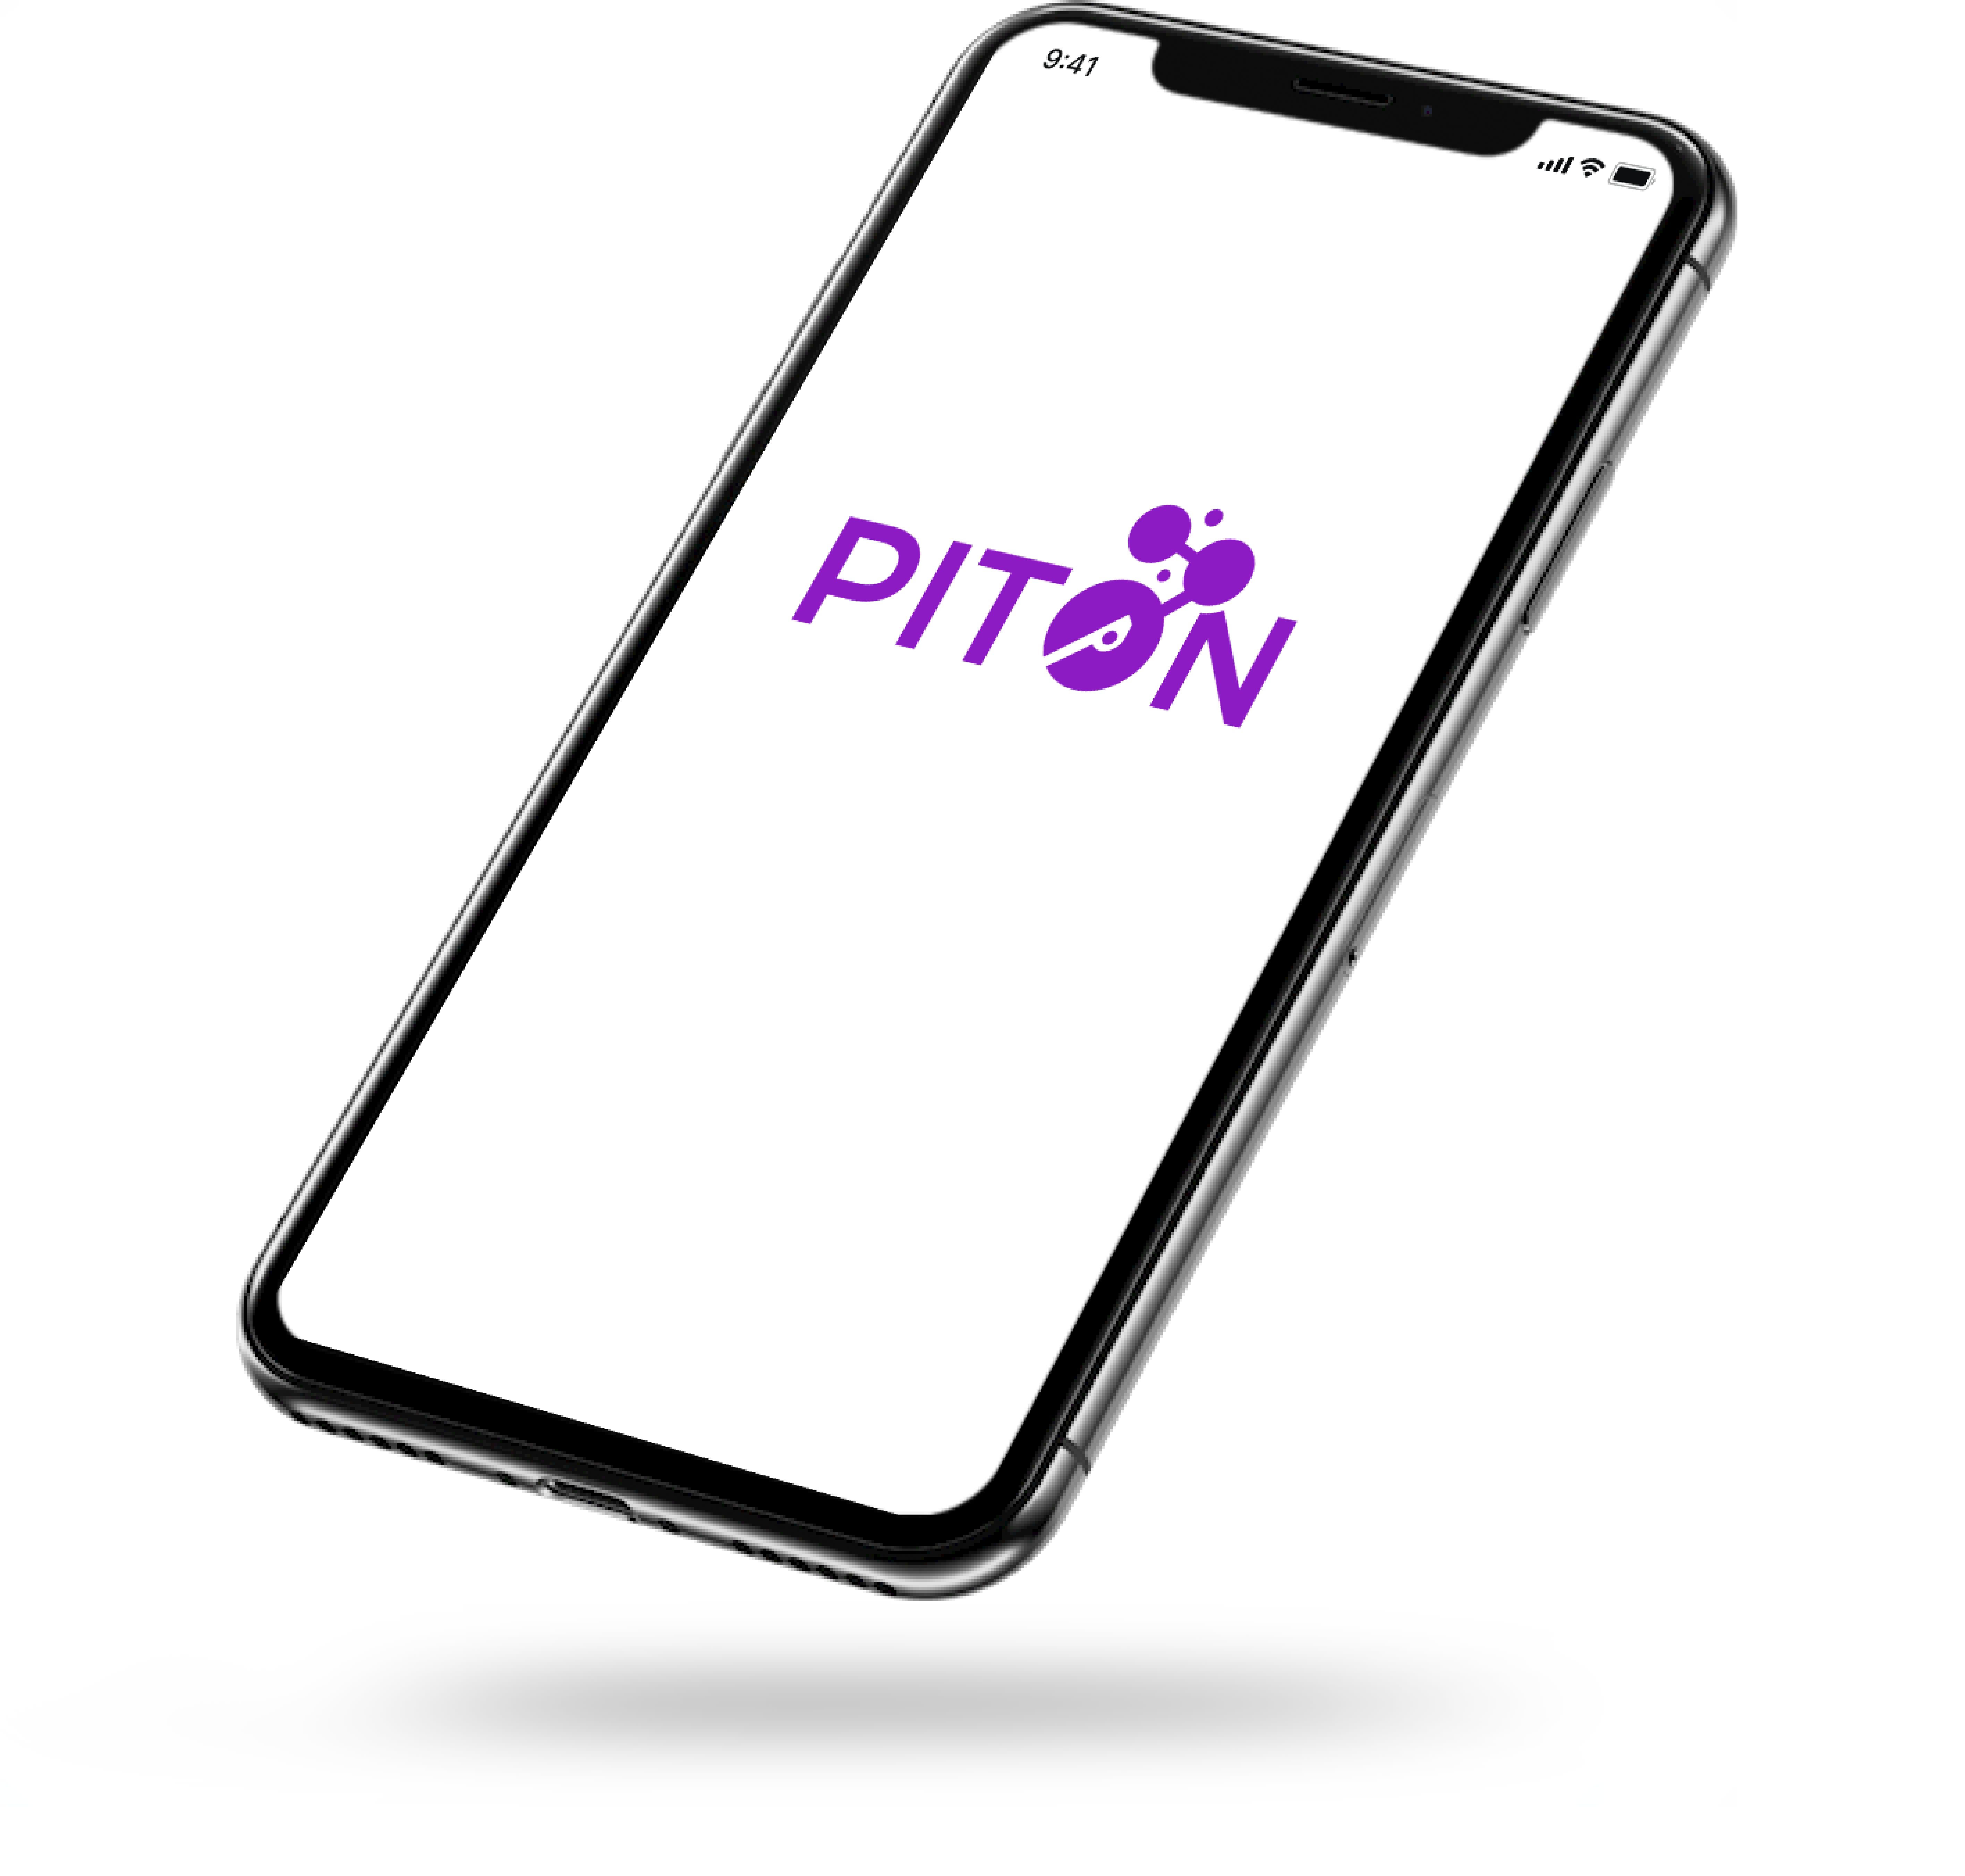 Phone with PITON displayed